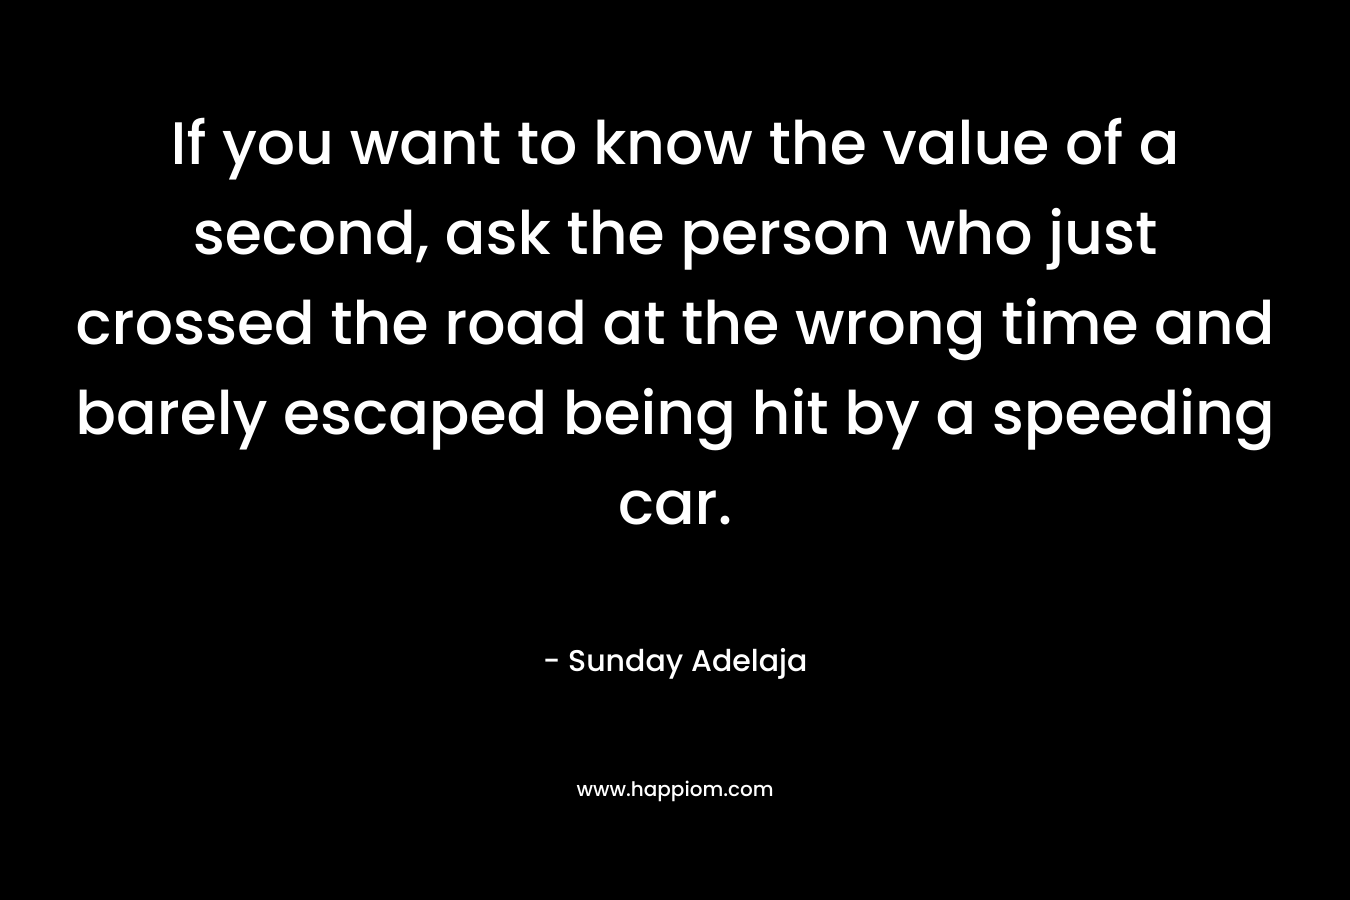 If you want to know the value of a second, ask the person who just crossed the road at the wrong time and barely escaped being hit by a speeding car.